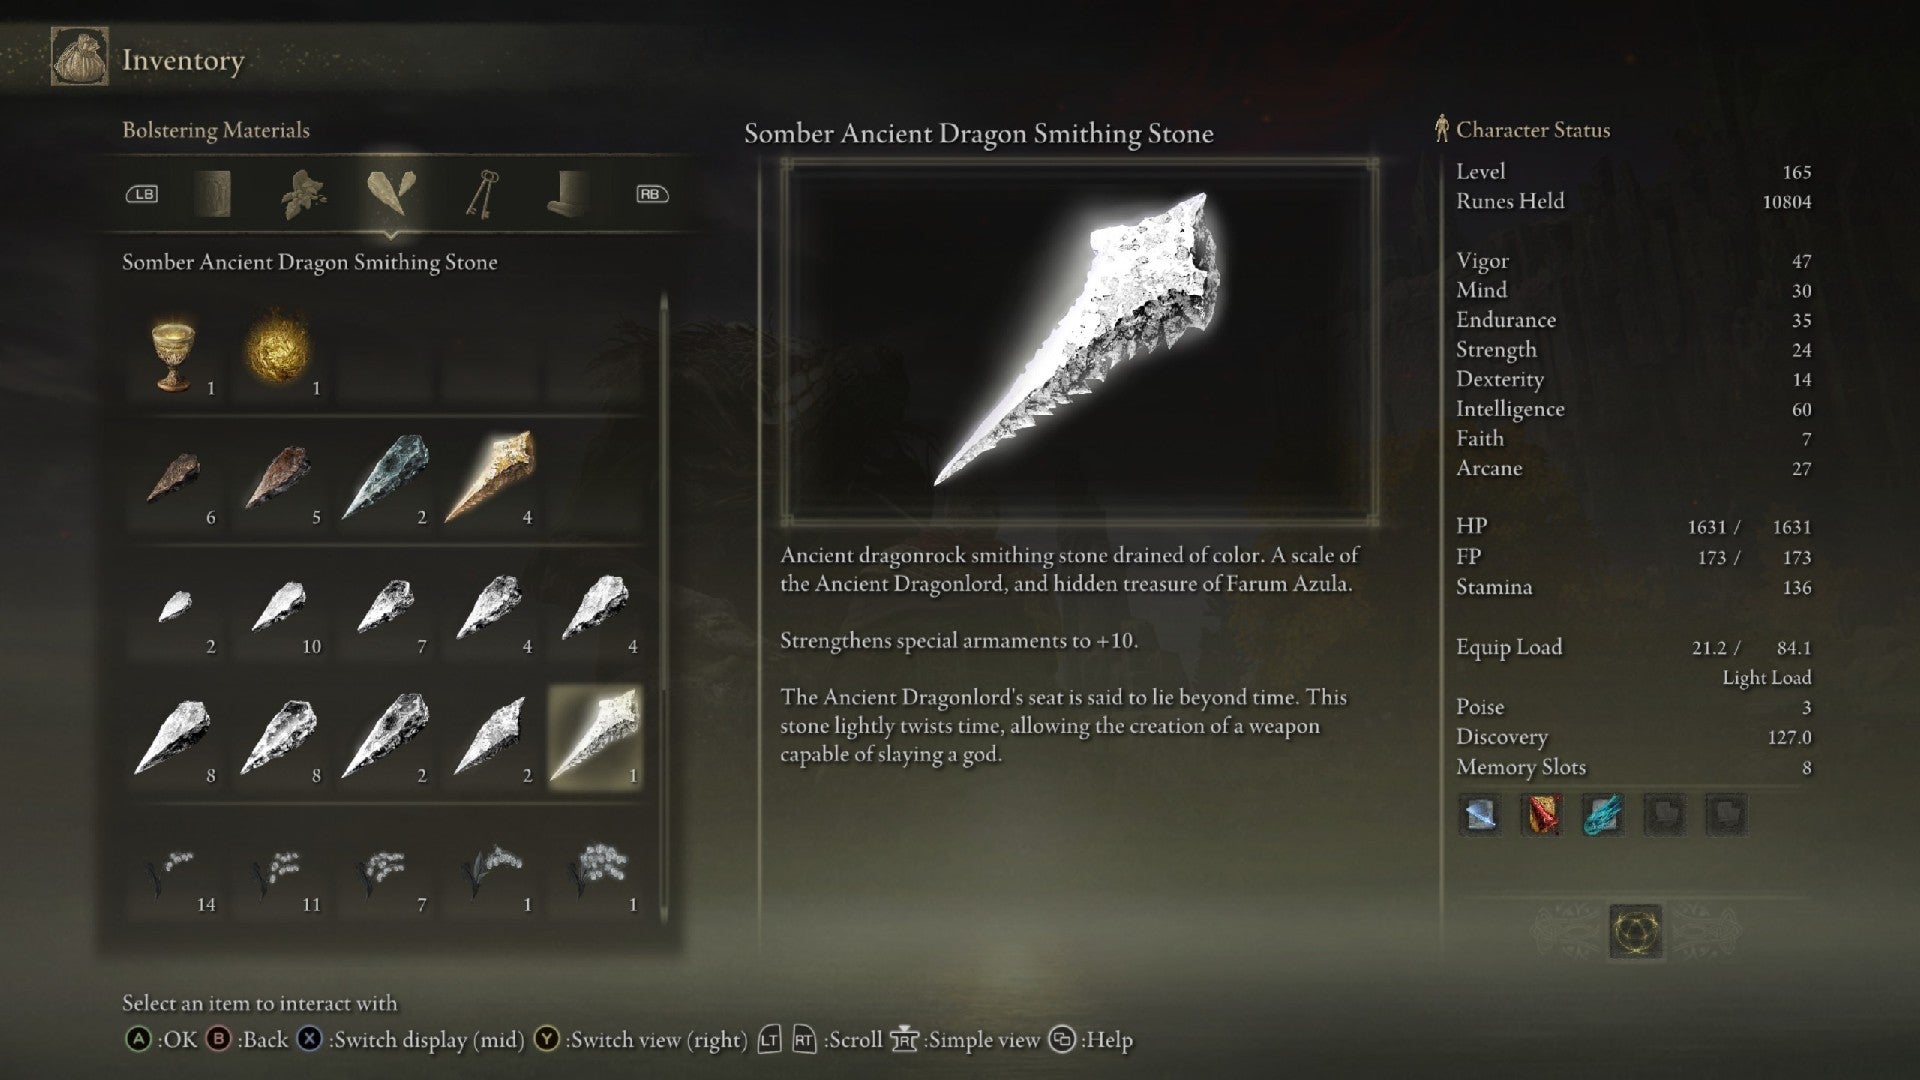 Elden Ring inventory screen displaying the Somber Ancient Dragon Smithing Stone, which is an upgrade item you can use on special weapons.